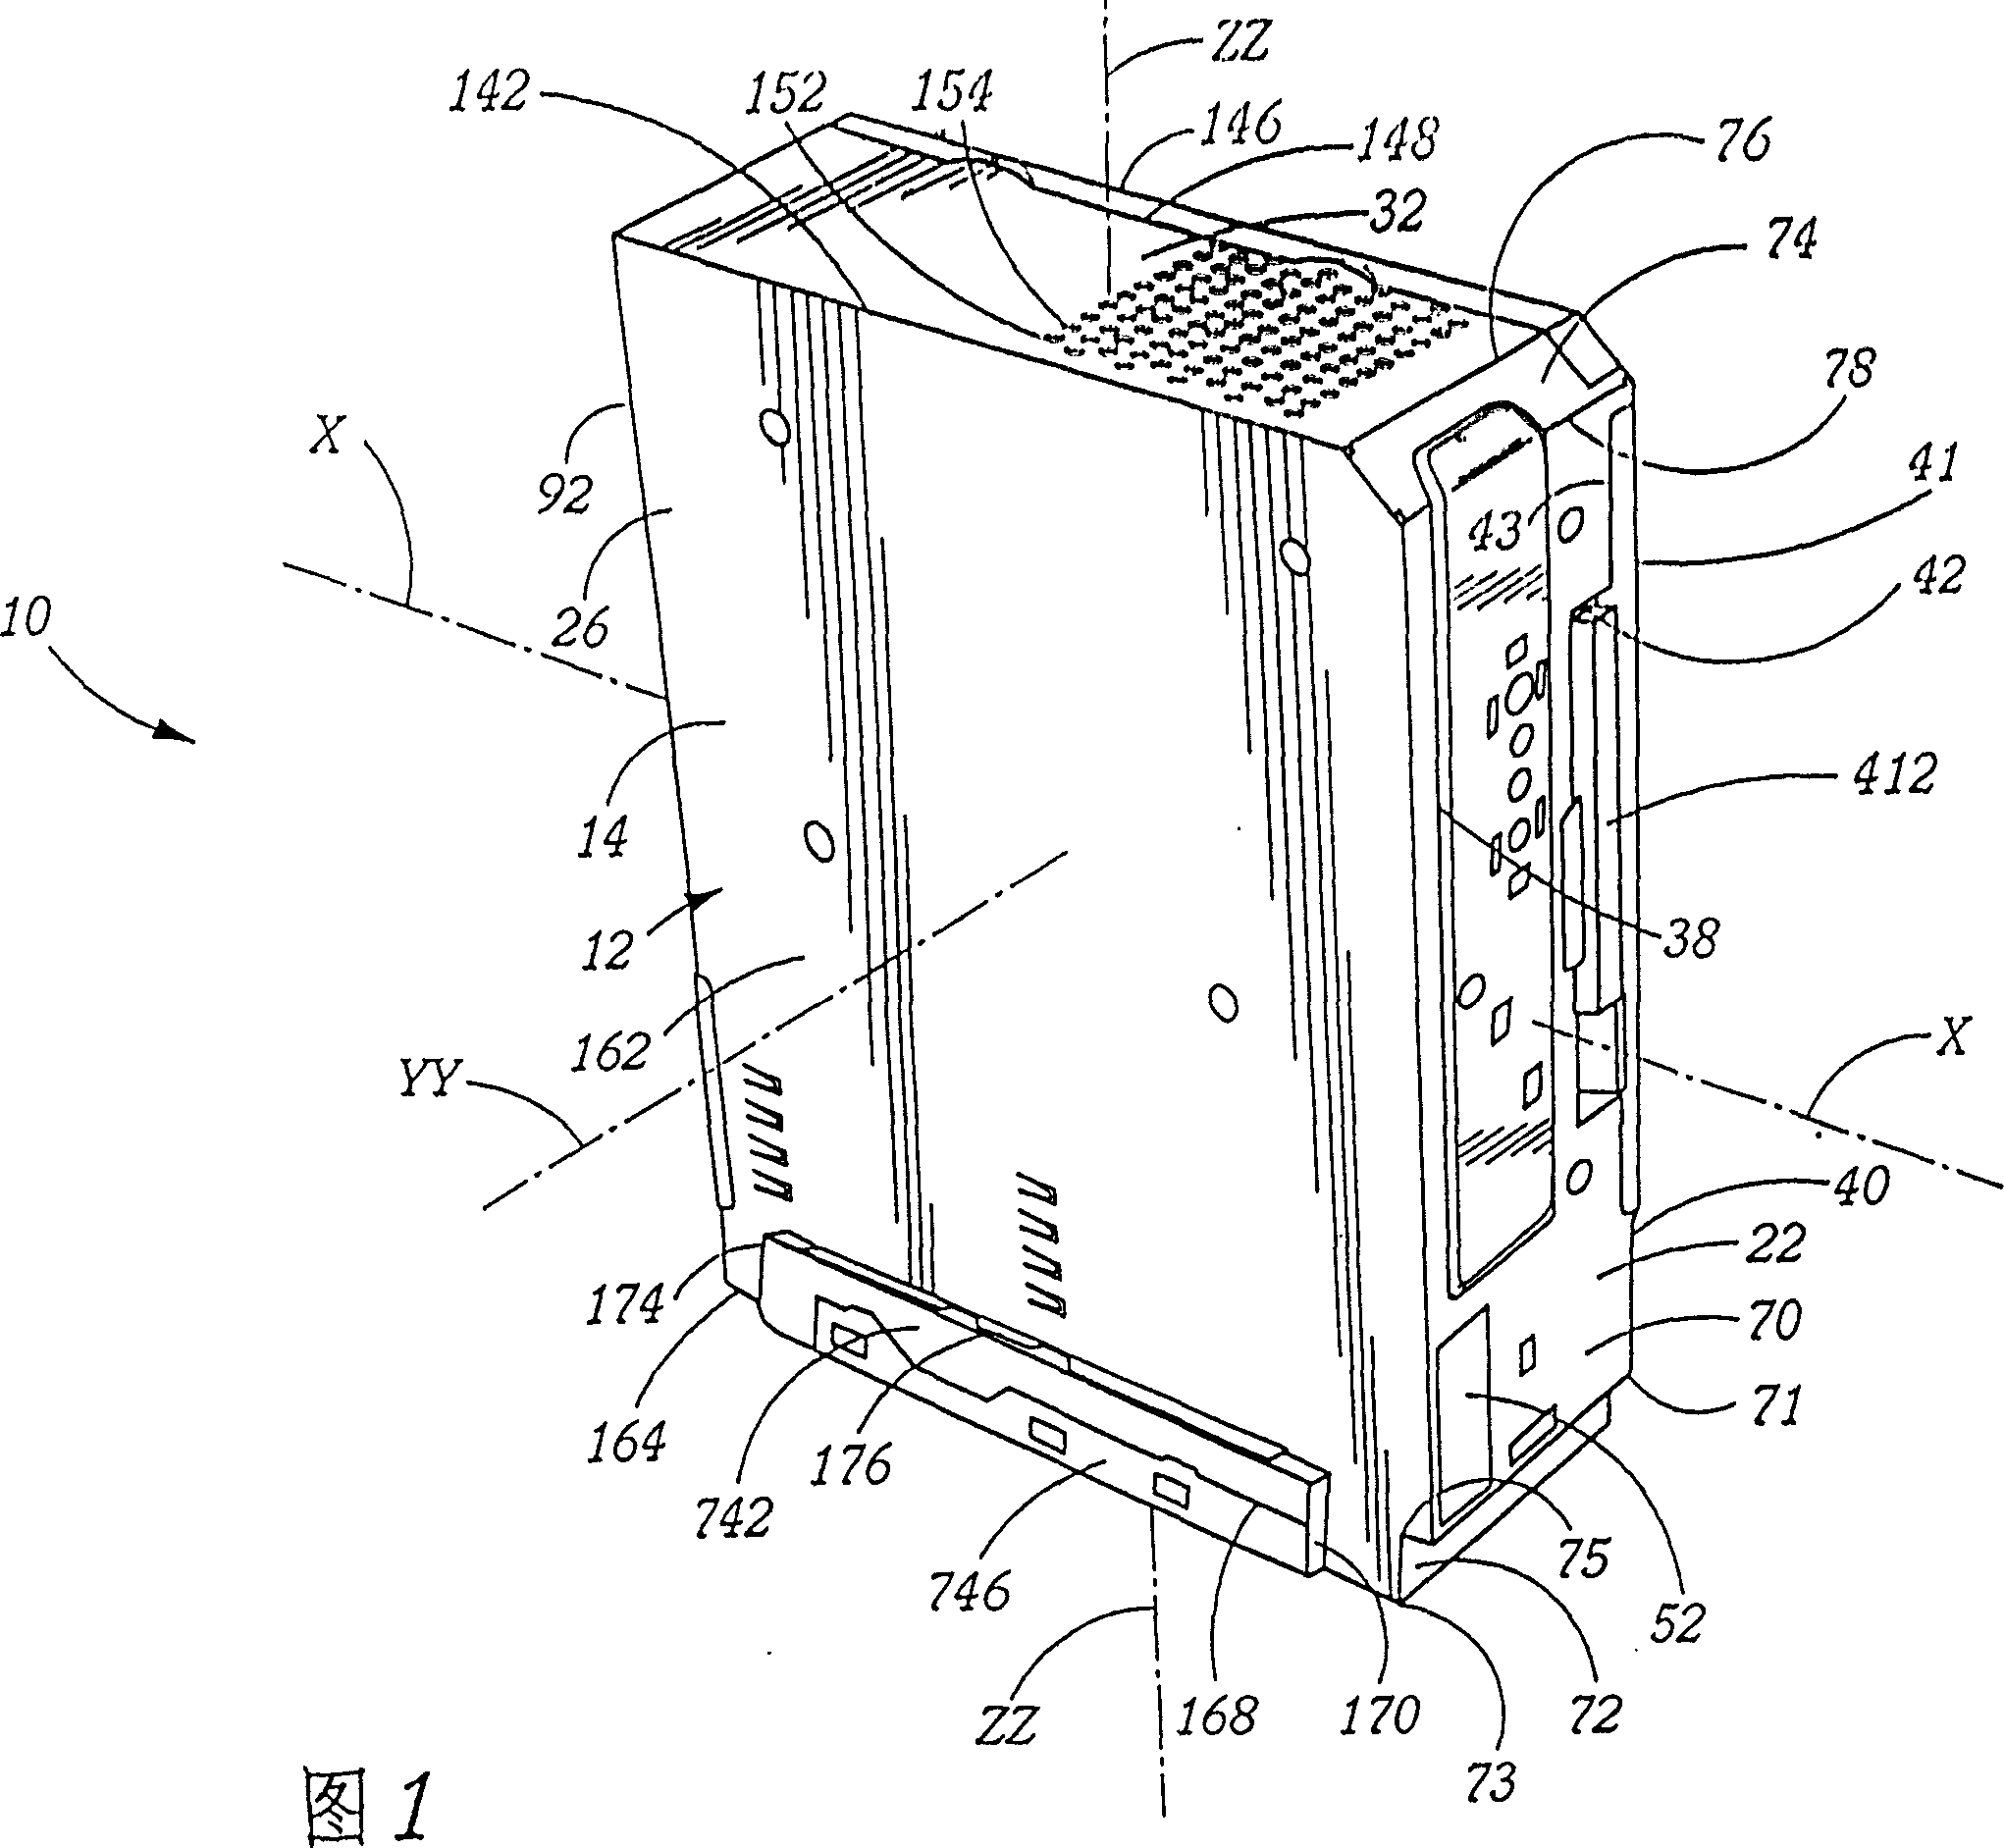 Computer with modular power assembly